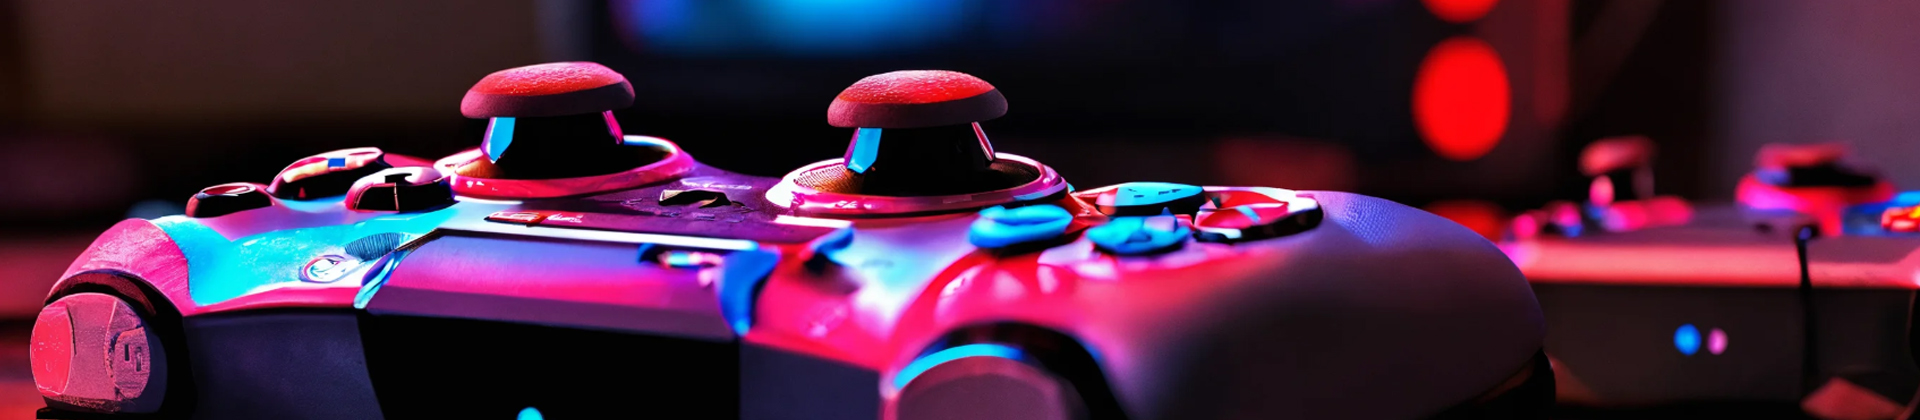 How Gaming Communities Impact on Players' Gaming Experience